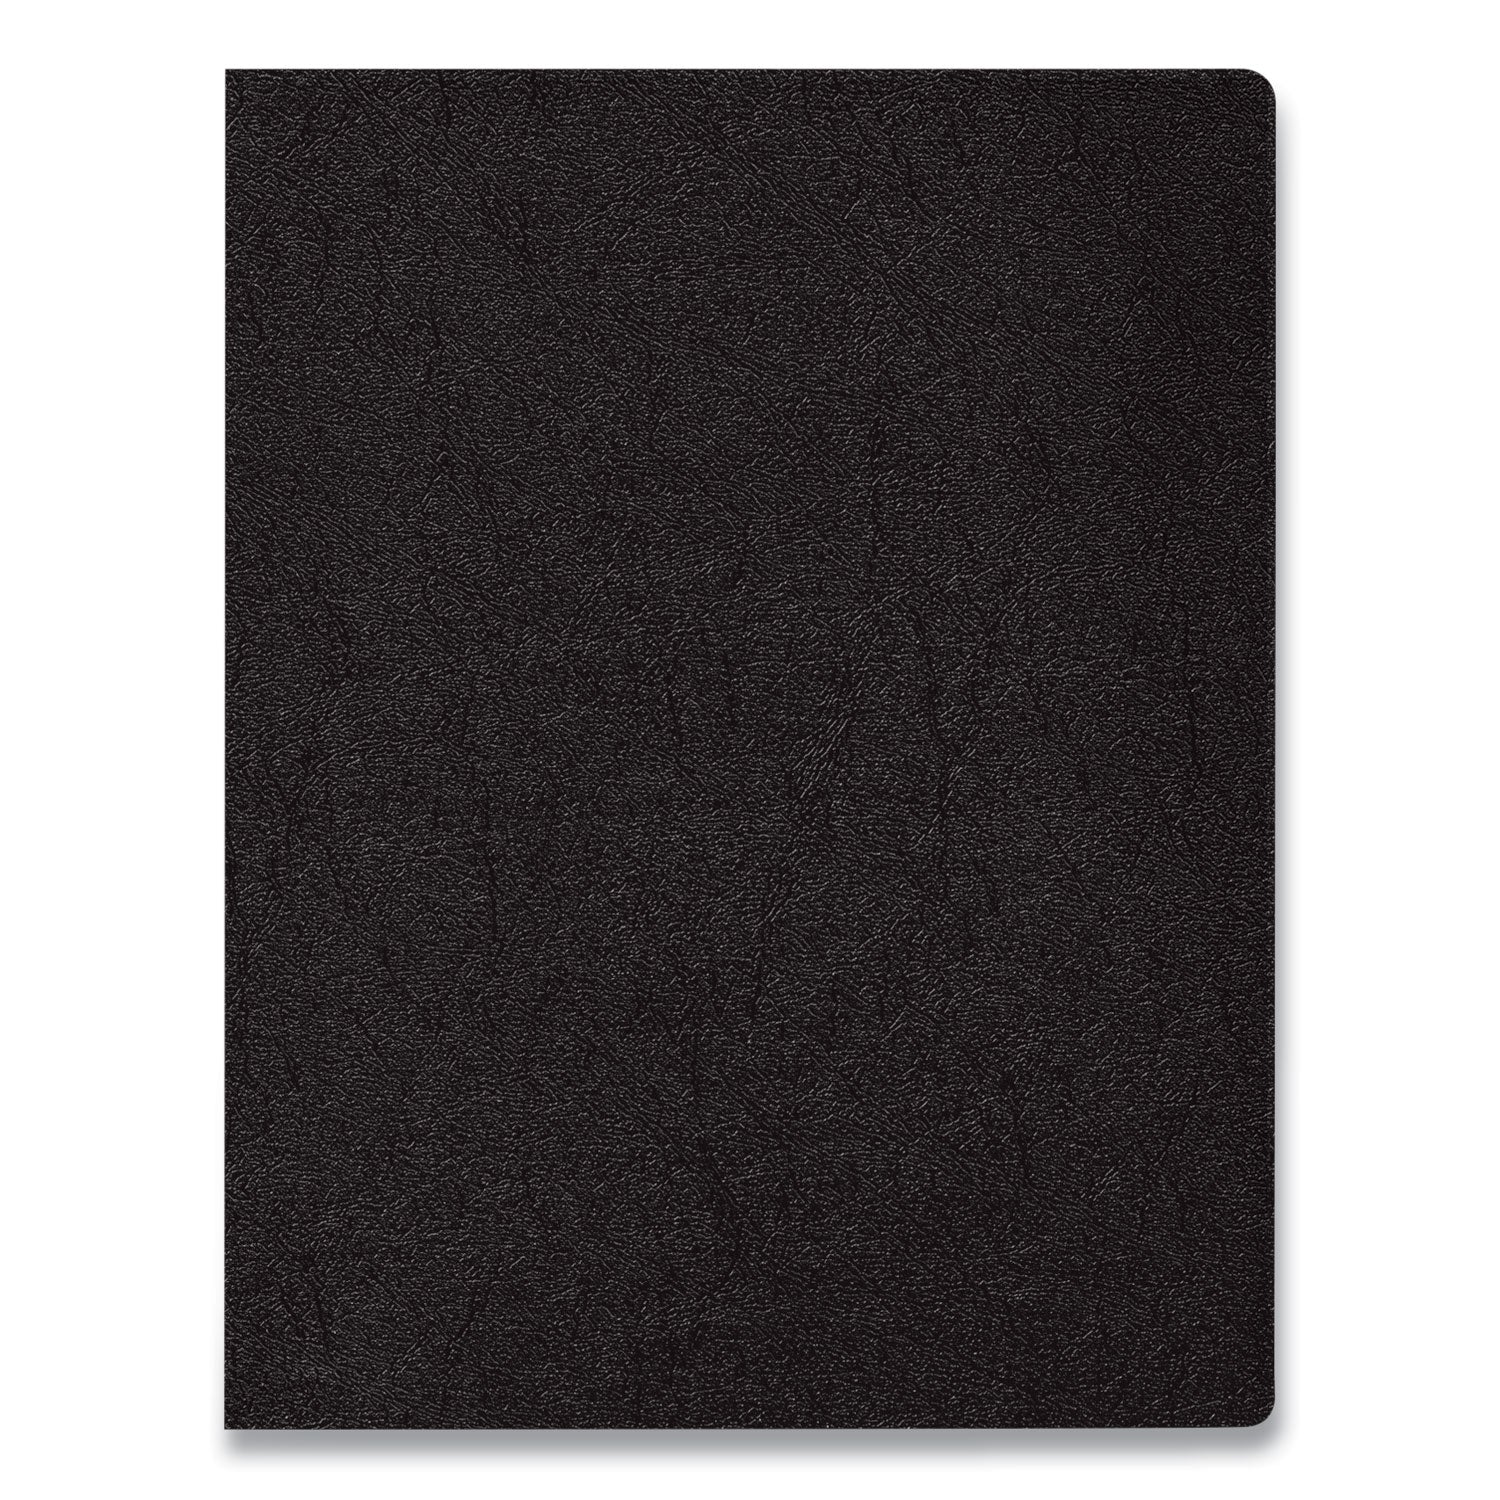 executive-leather-like-presentation-cover-black-11-x-85-unpunched-200-pack_fel5229101 - 3